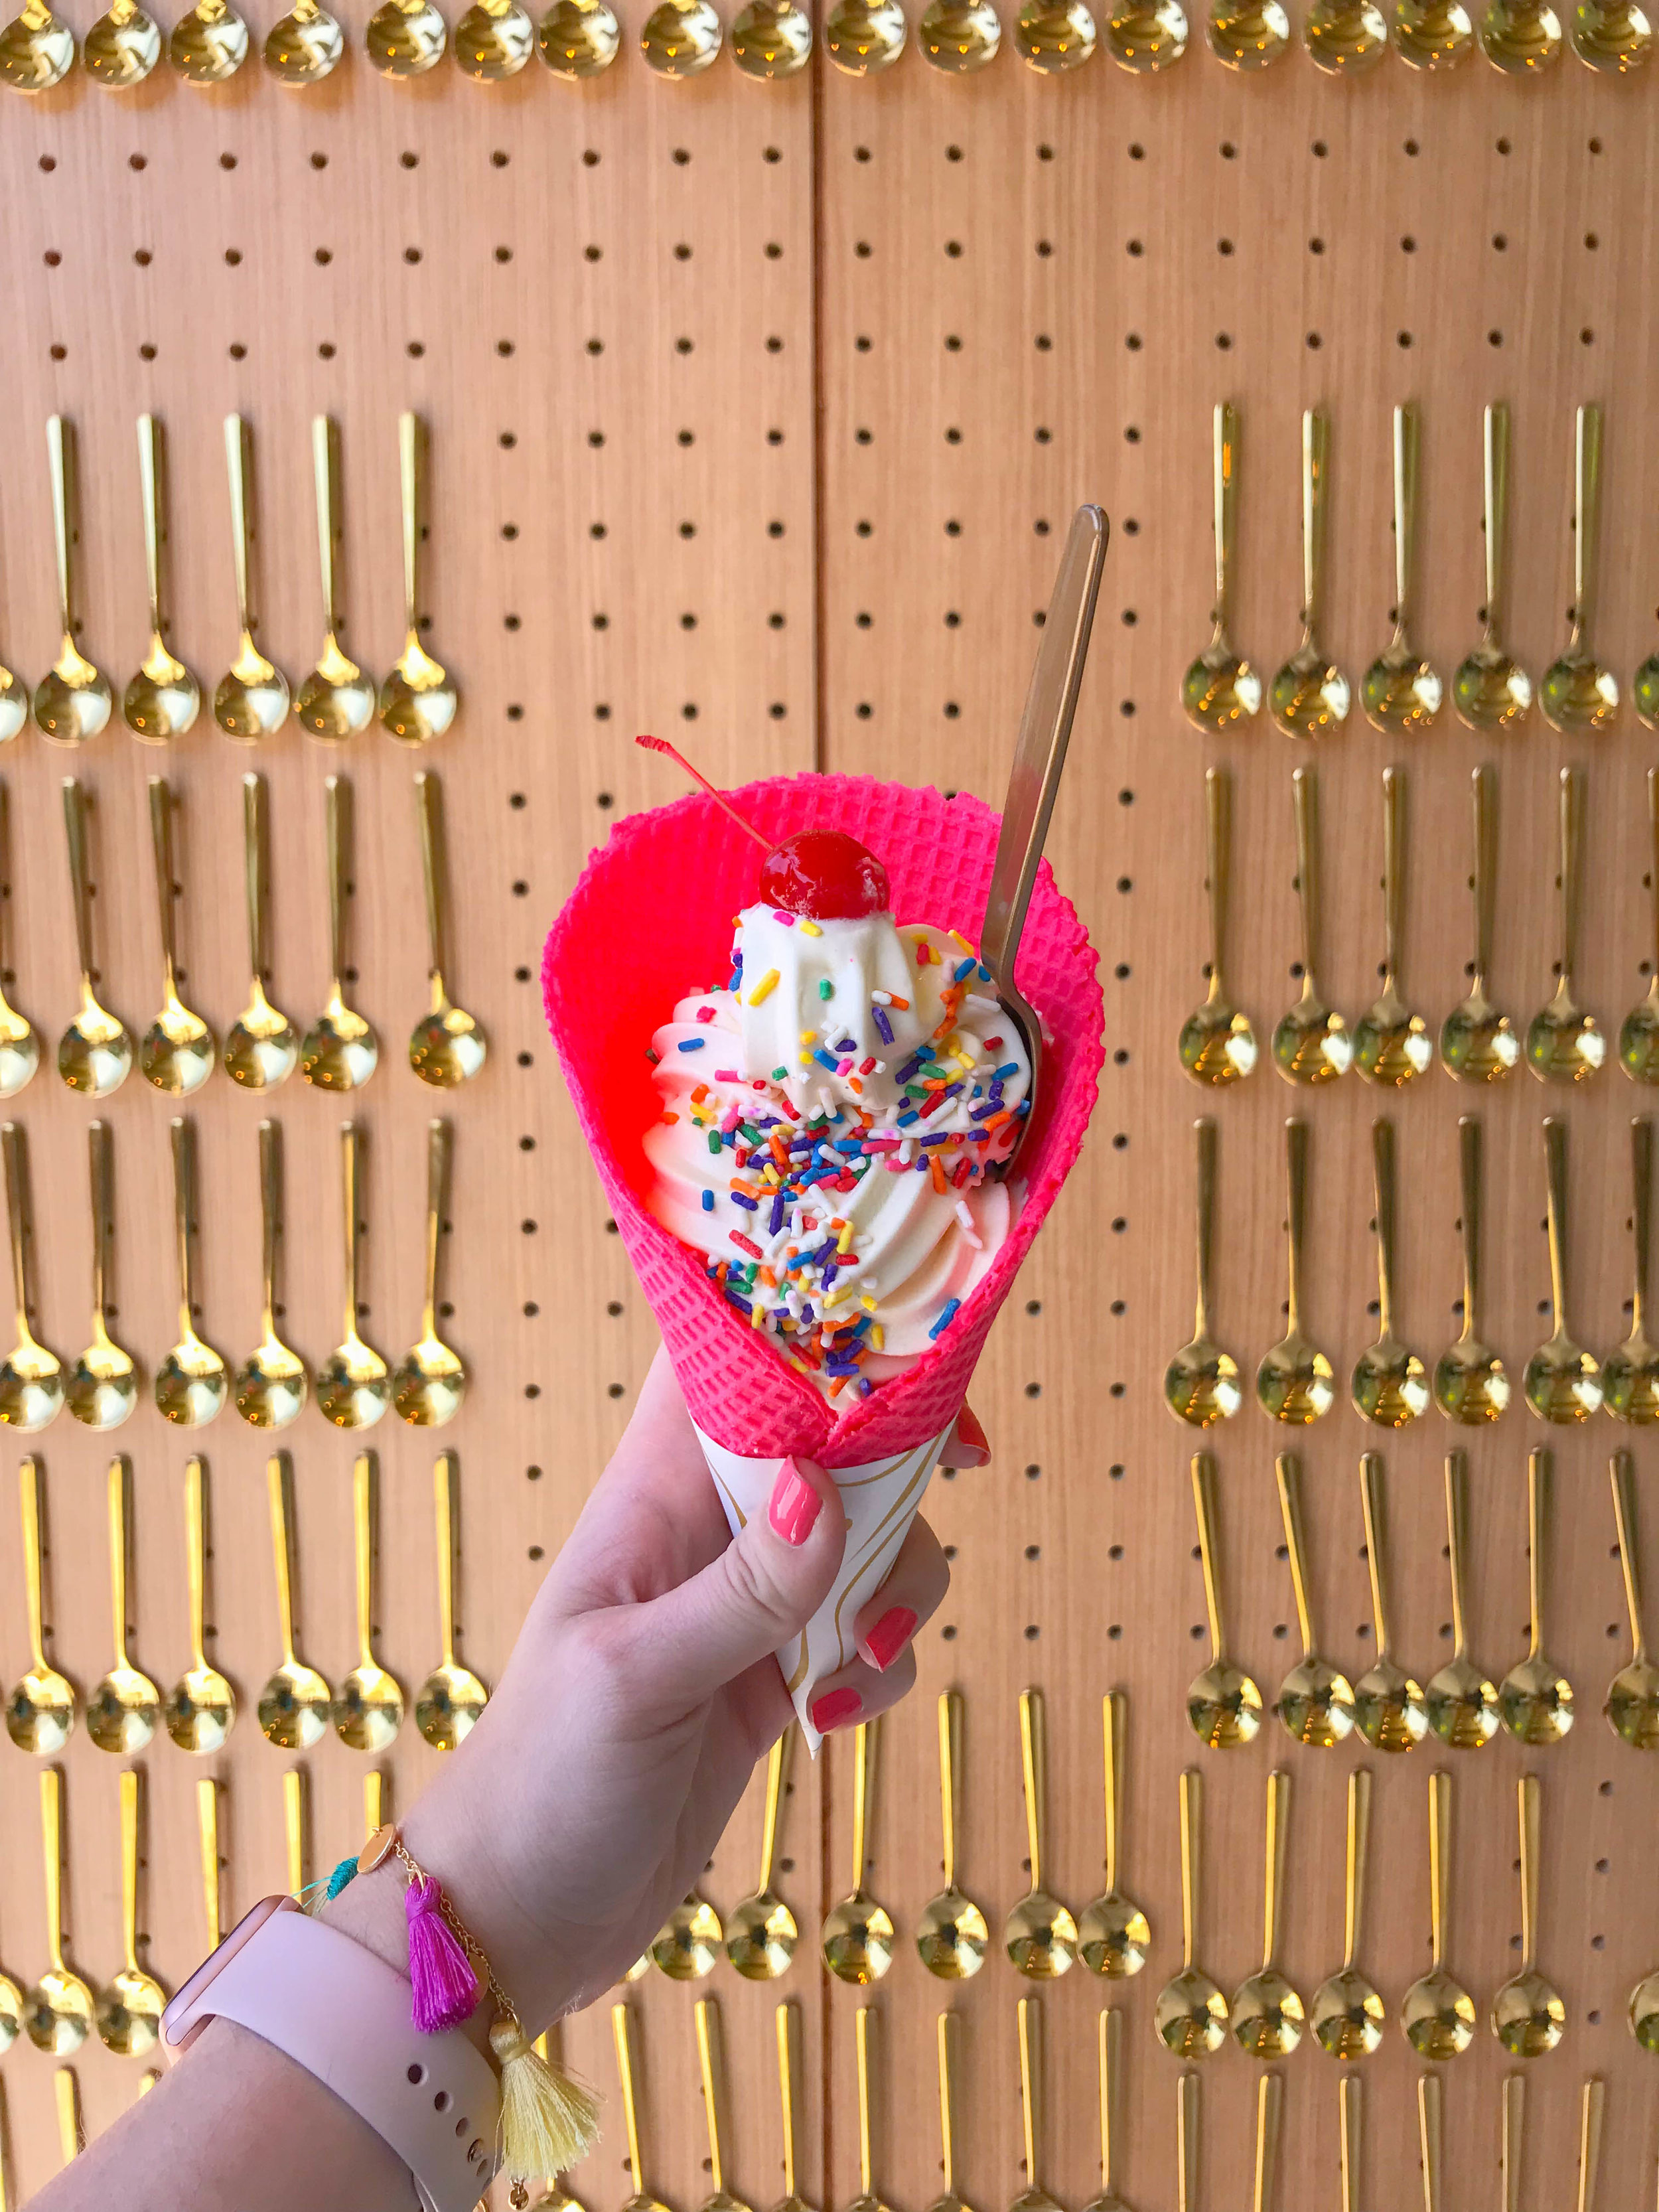 Ice Cream Review: Halo Top Scoop Shop in Los Angeles, CA - Best soft serve — The Sweetest Escapes